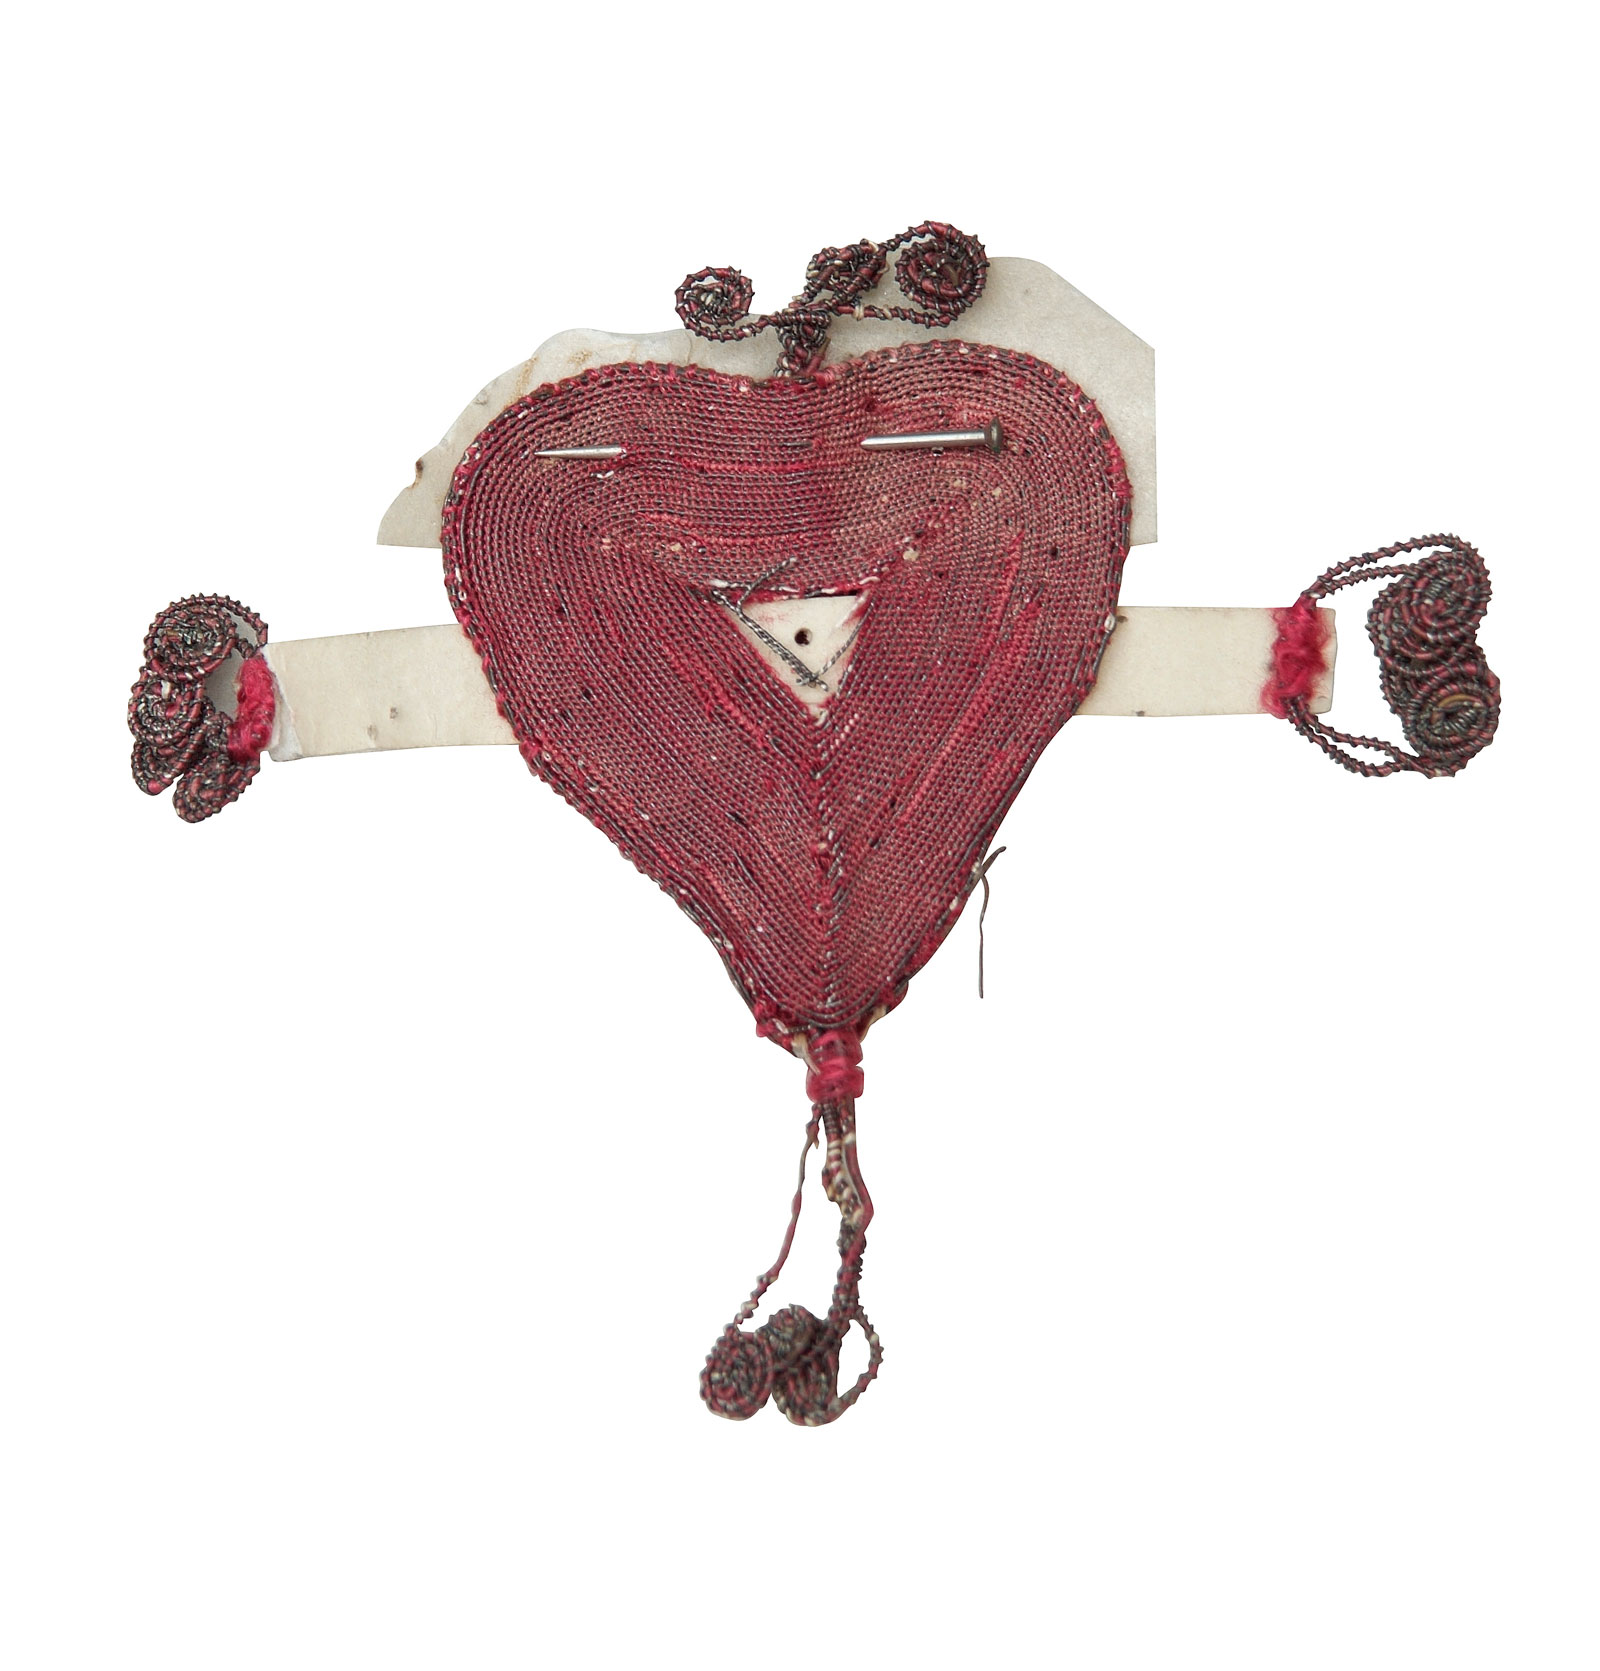 Textile heart left with a foundling as a memento, mid-eighteenth century